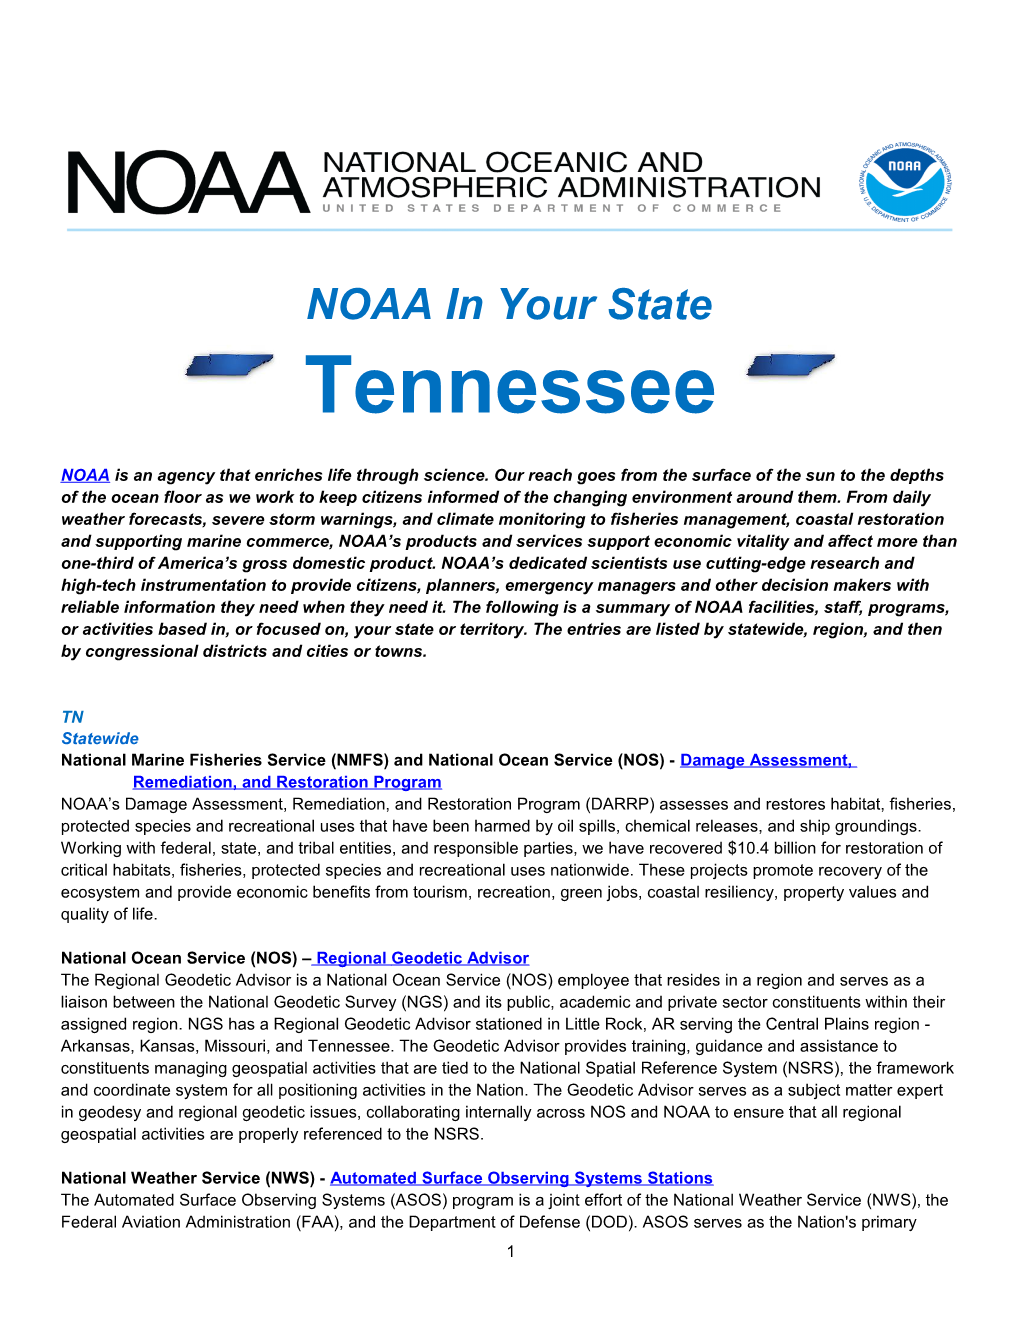 NOAA in Your State - Tennessee